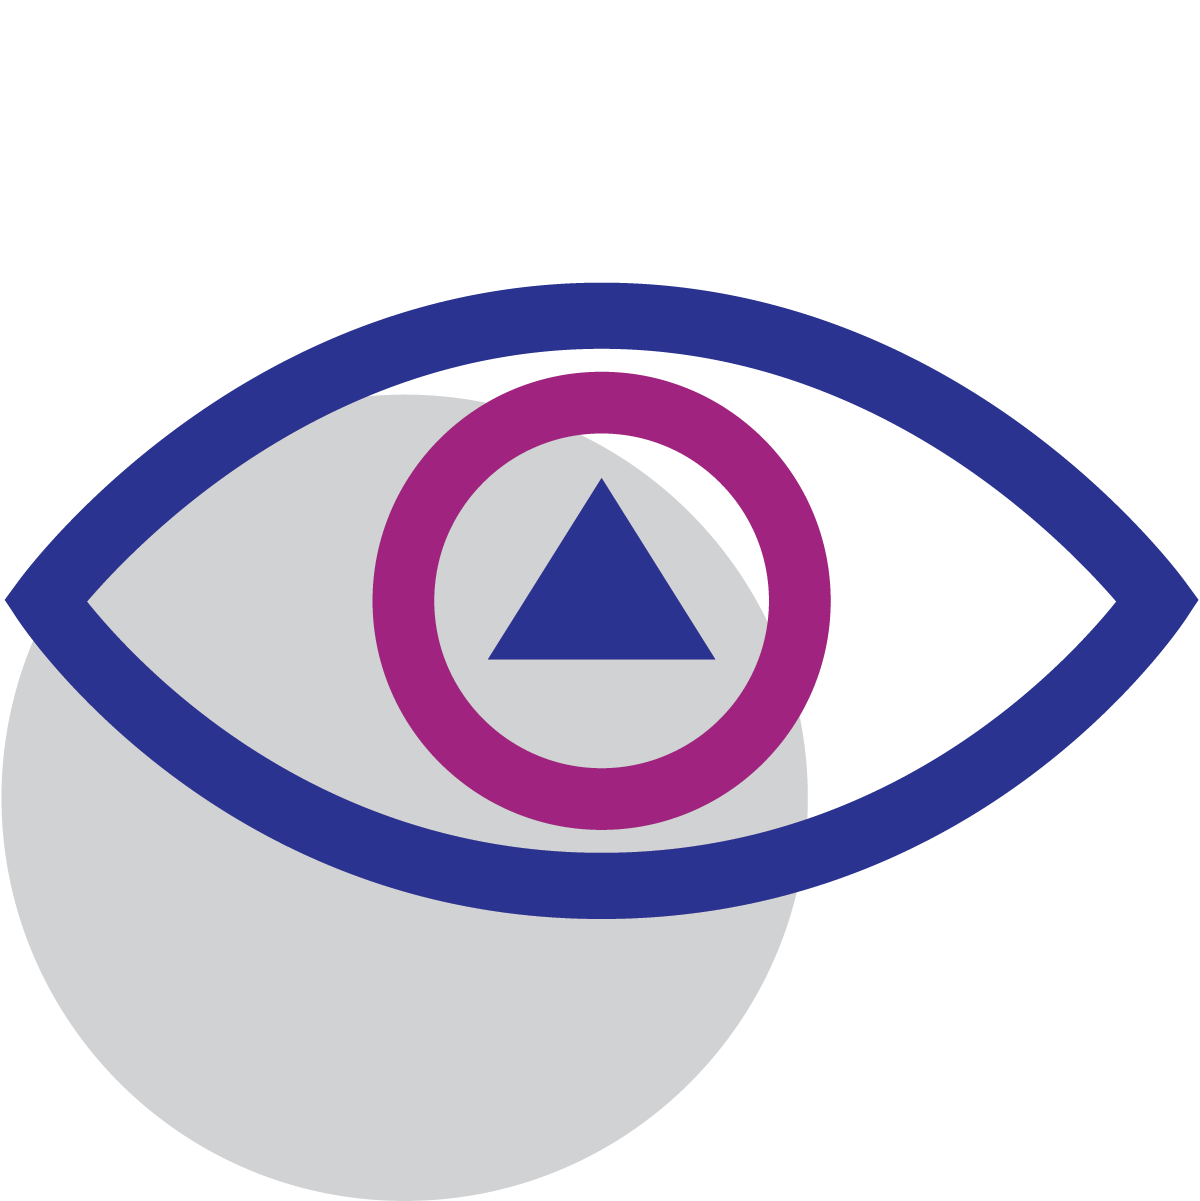 Purple eye with a pink circular iris and a purple triangle pupil overlaying a gray circle